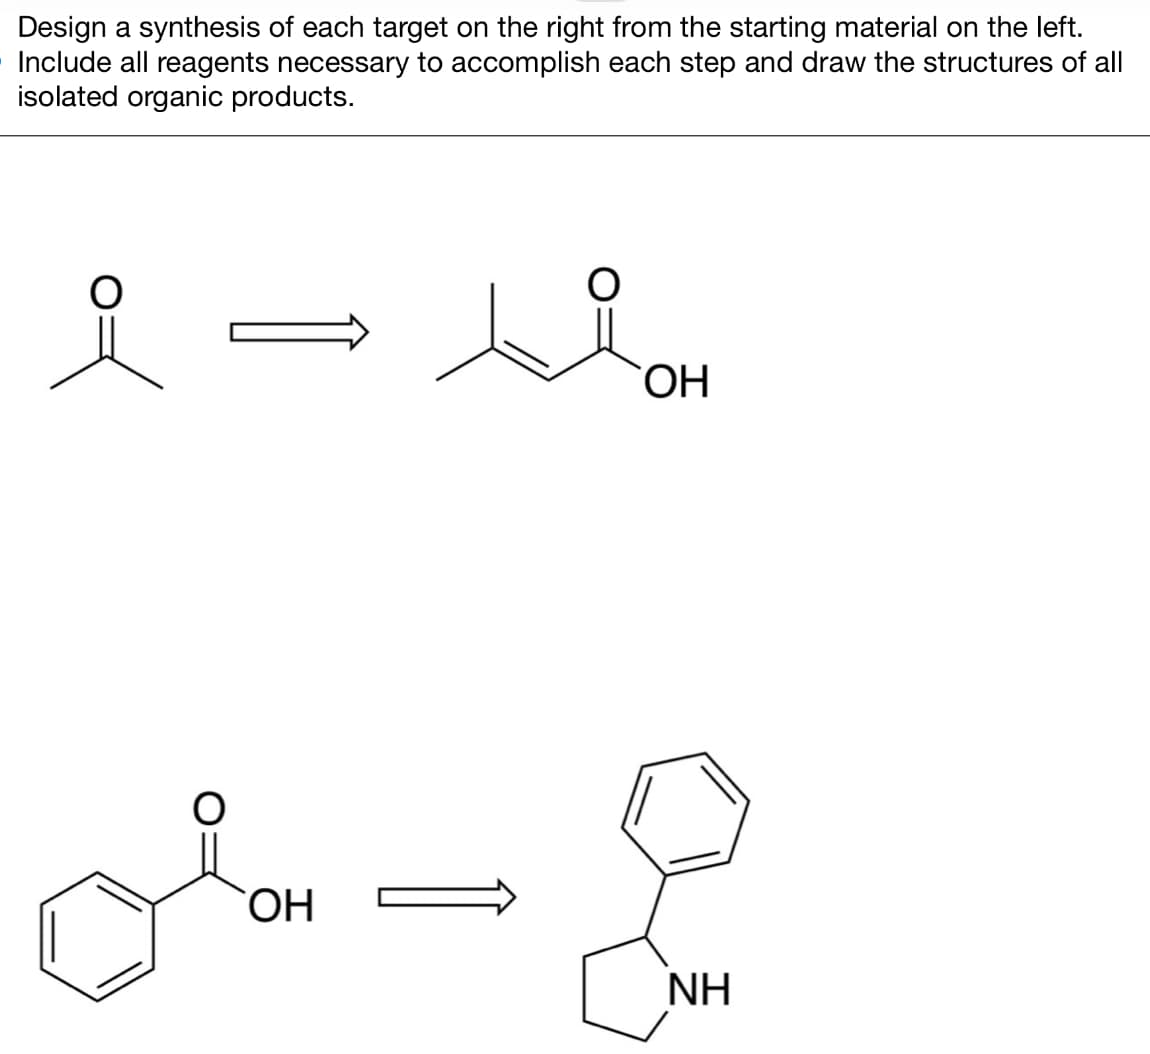 Design a synthesis of each target on the right from the starting material on the left.
Include all reagents necessary to accomplish each step and draw the structures of all
isolated organic products.
요요
OH
OH
NH